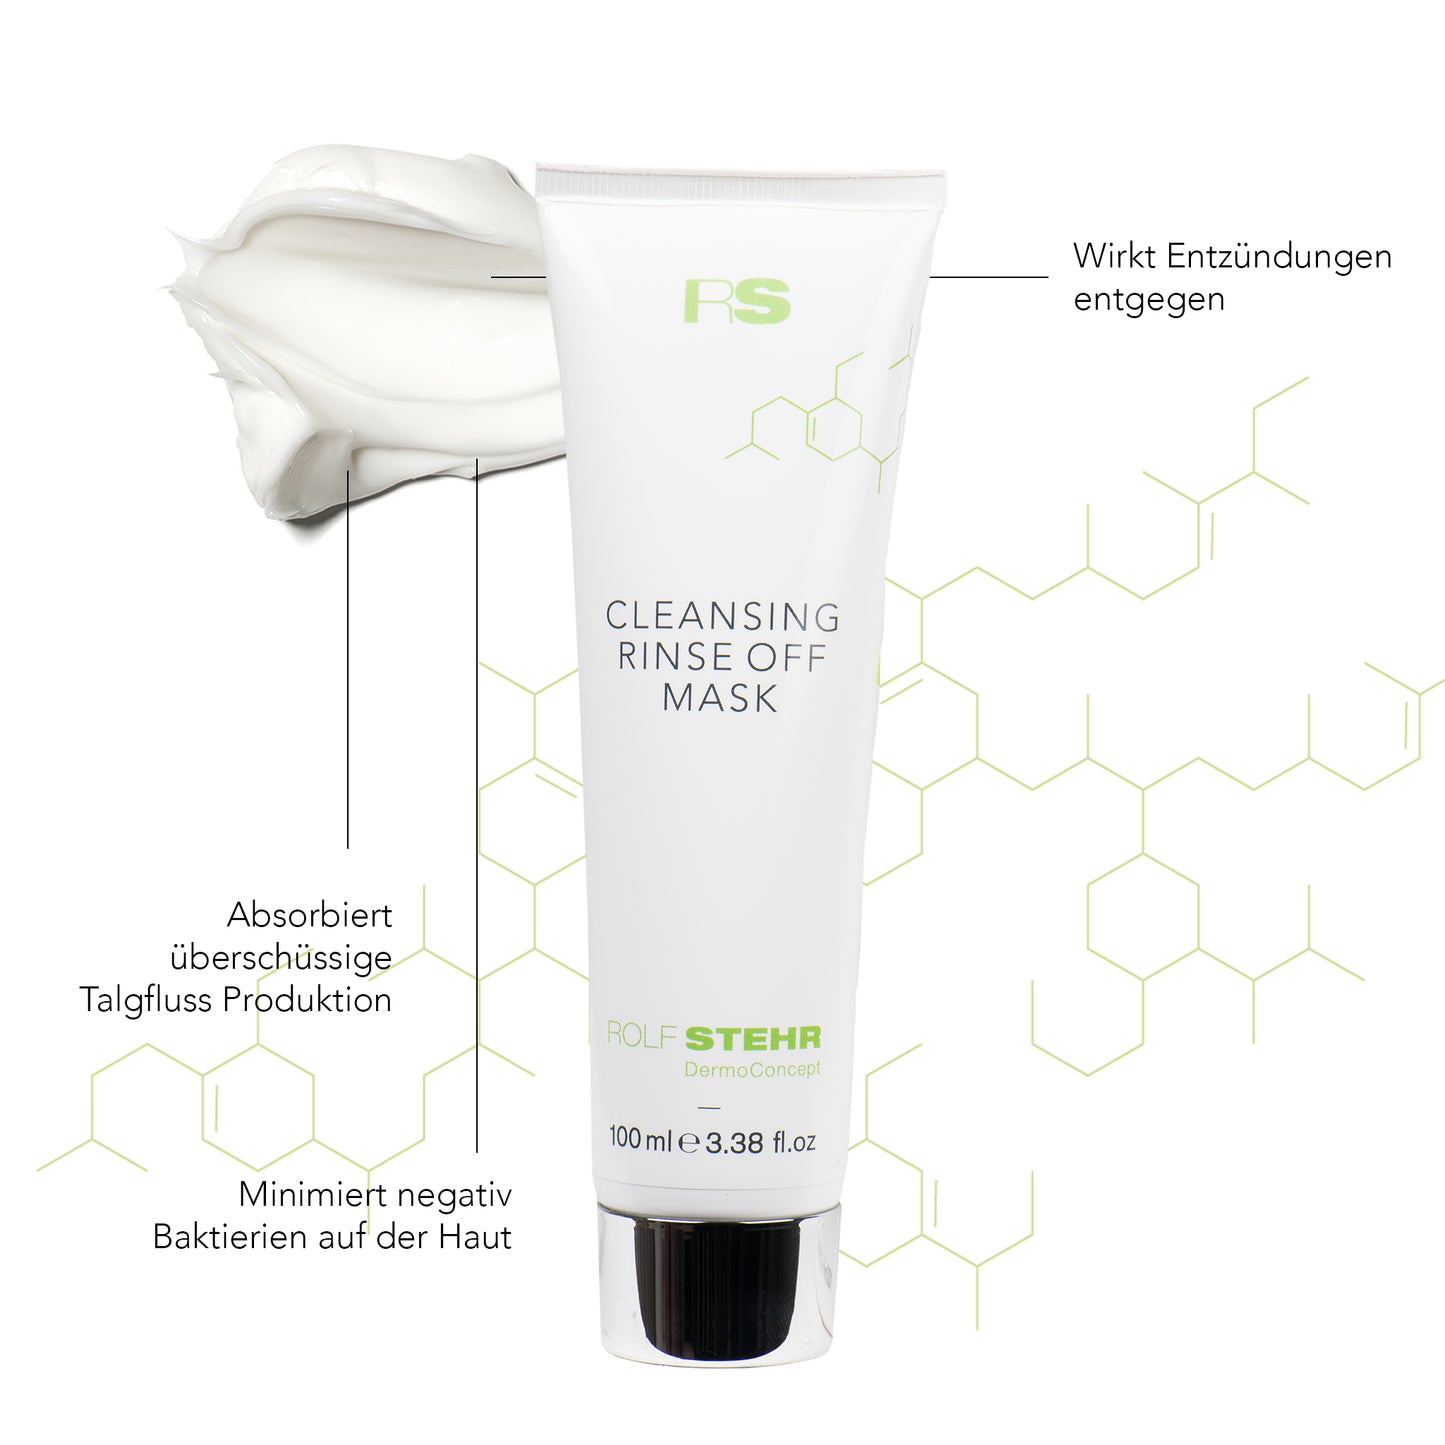 Cleansing Rinse Off Mask <br> Impure Skin